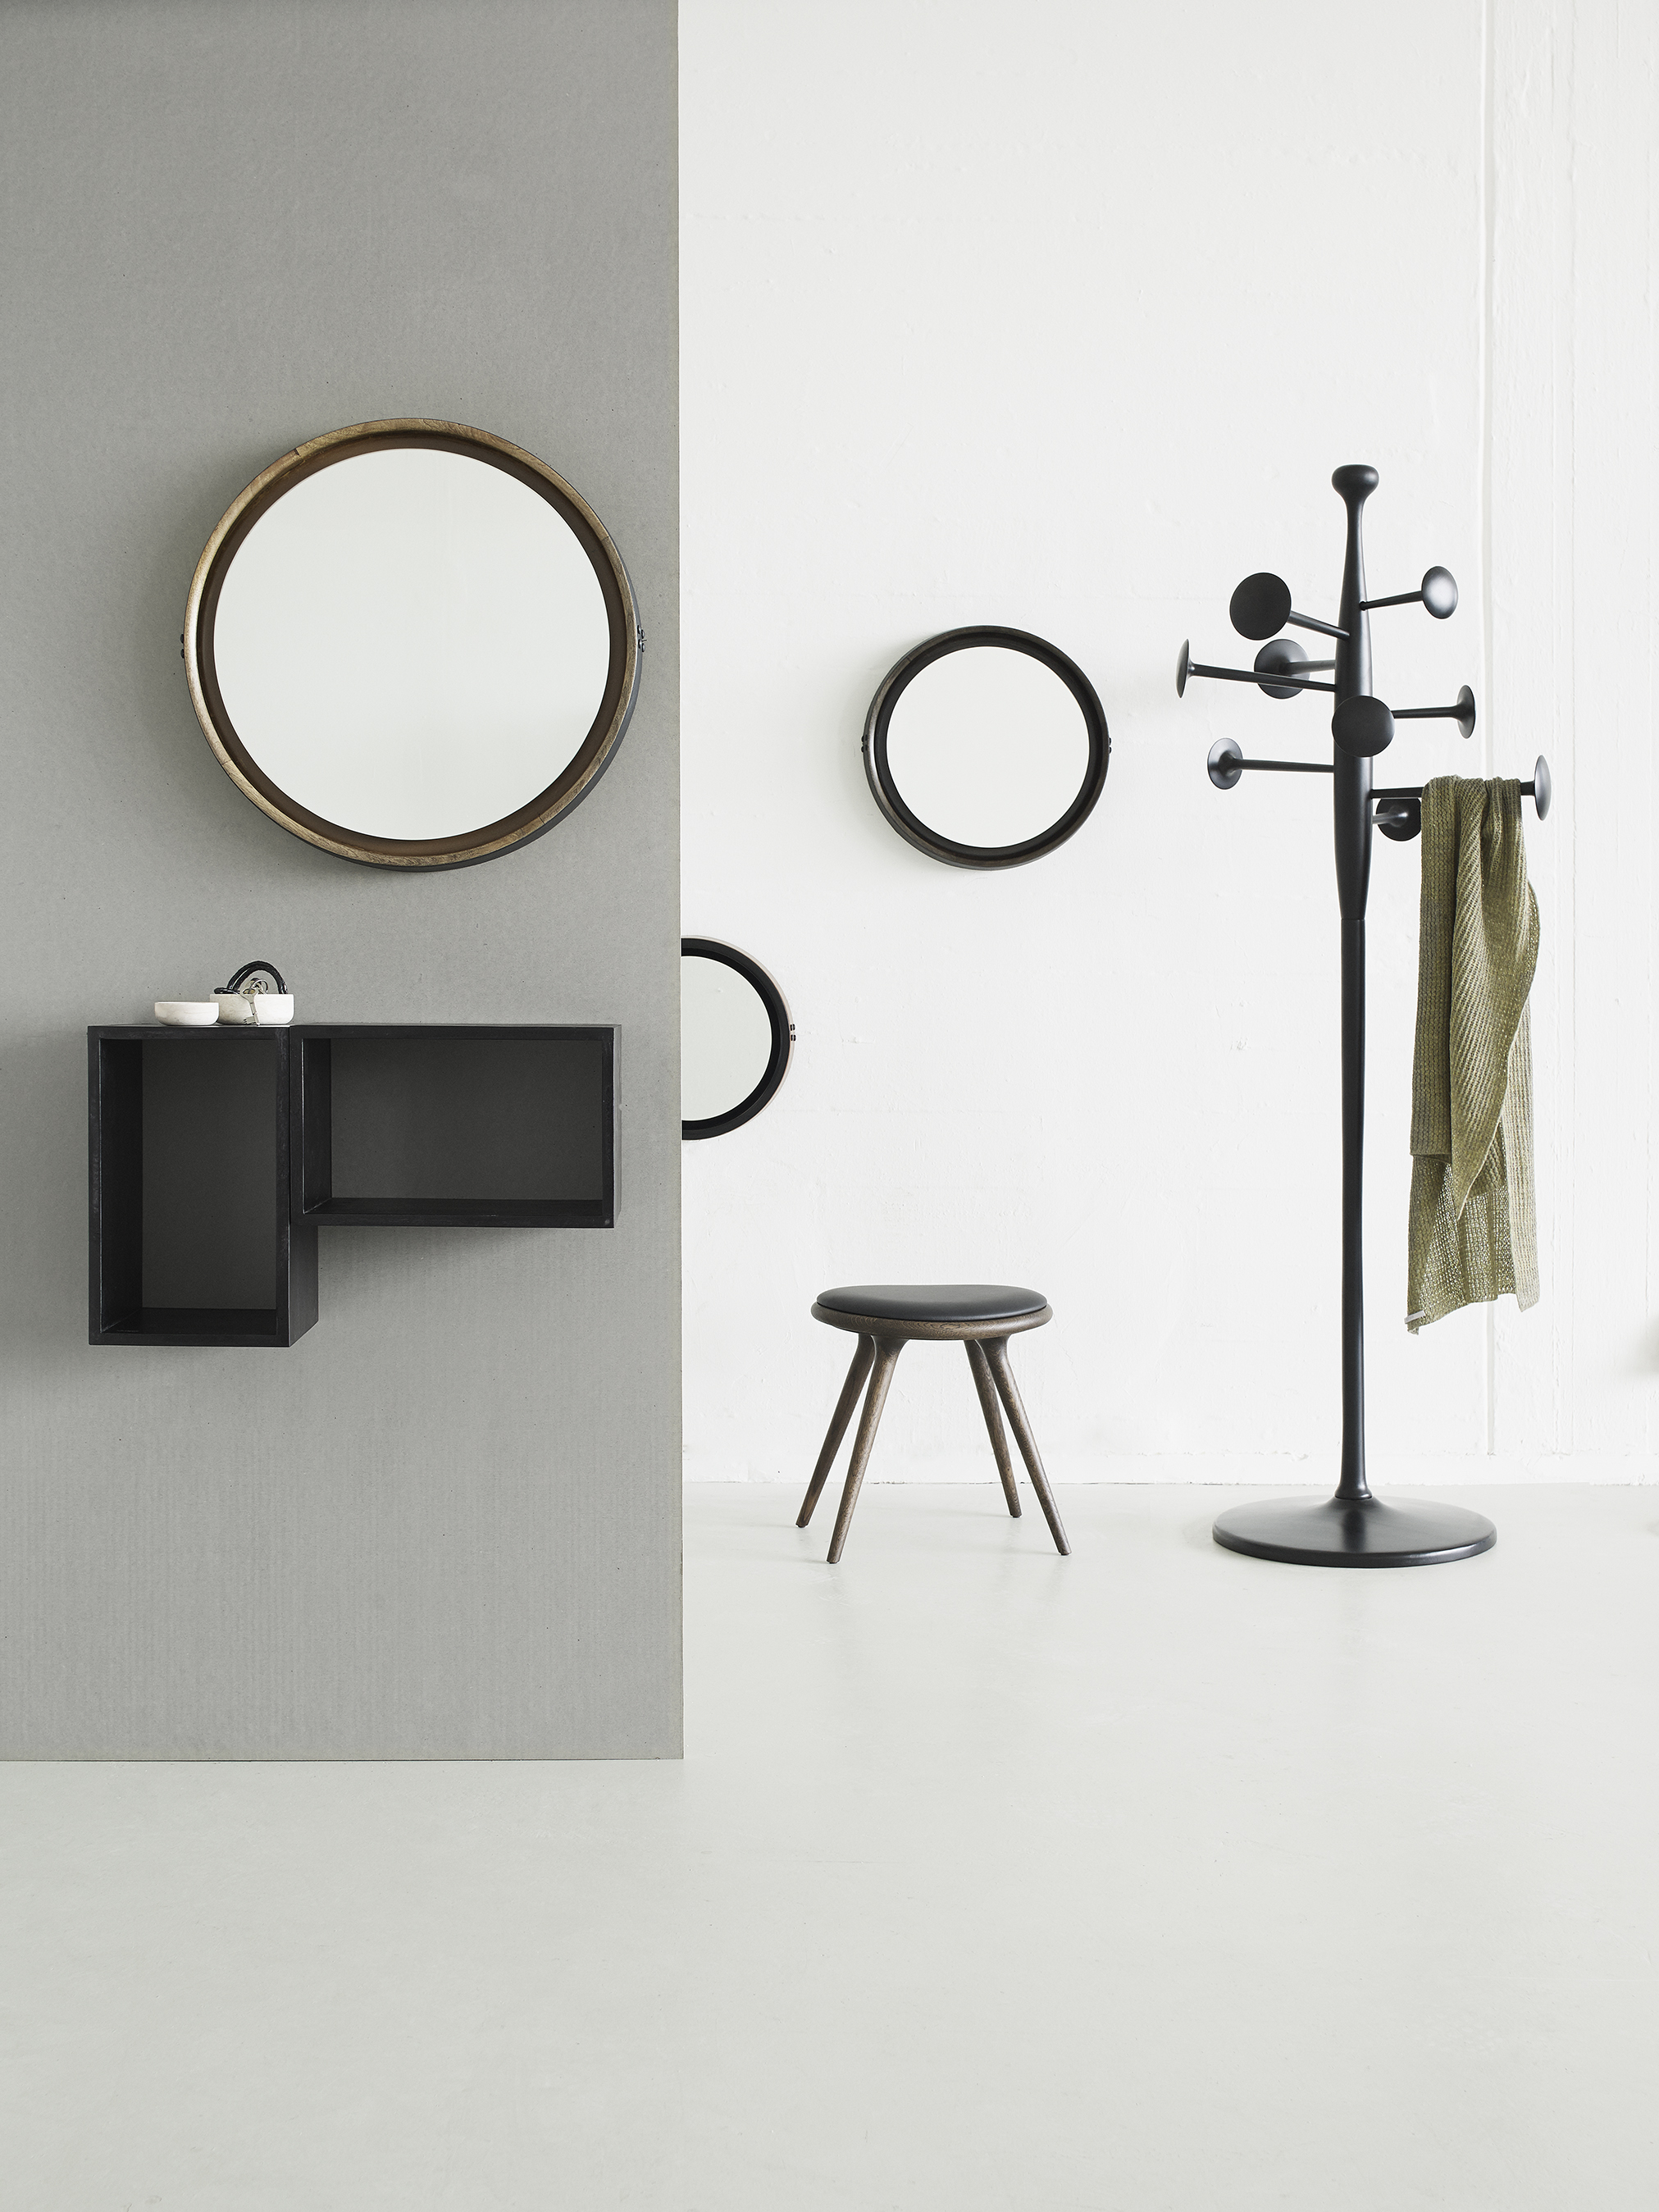 Mater Design Trumpet Coat stand and Sophie Mirror from Mater Design